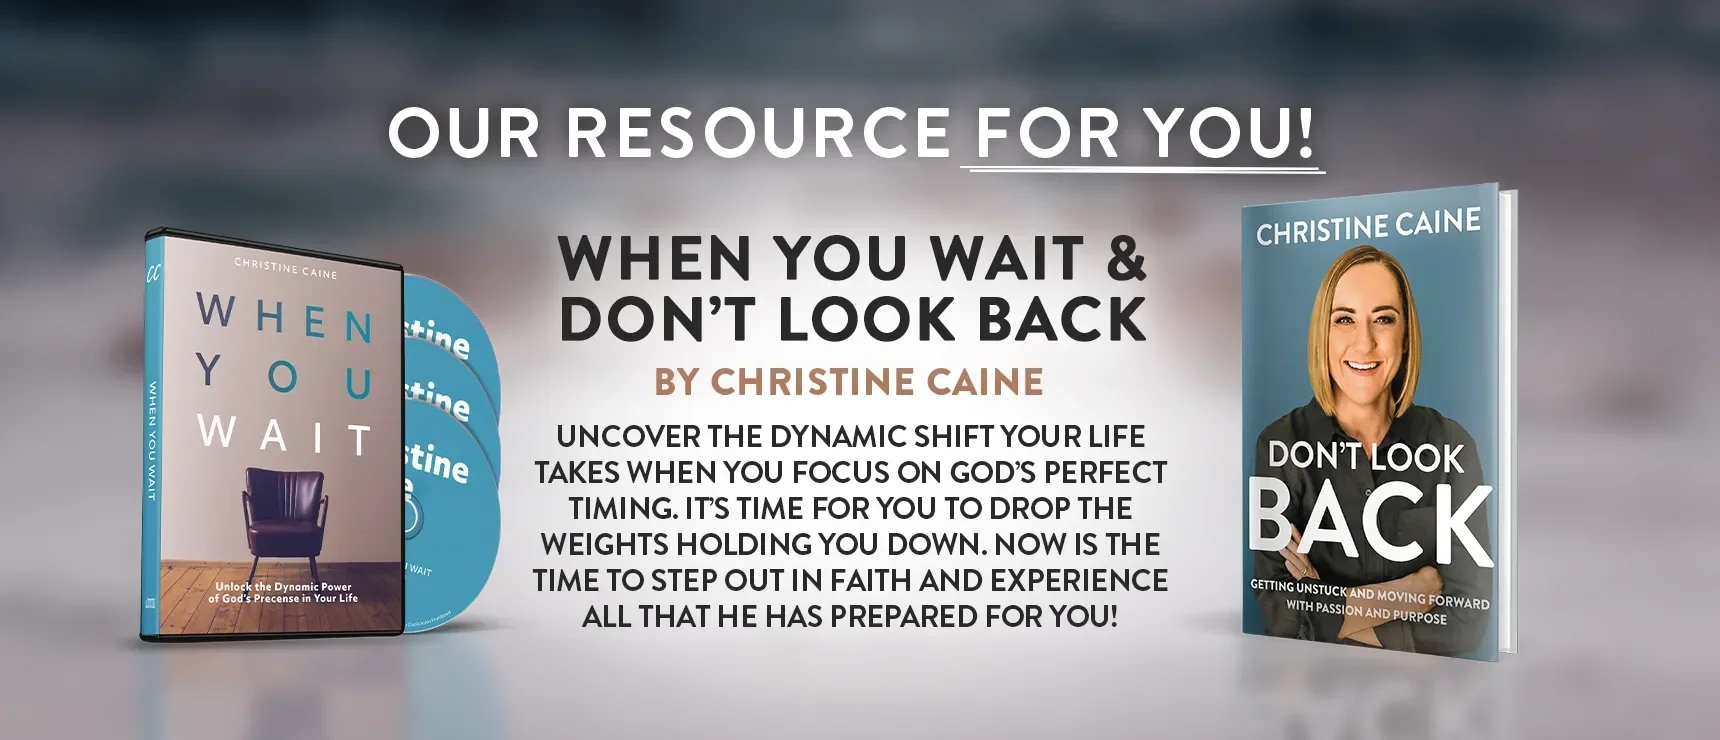 When You Wait + Don't Look Back by Christine Caine